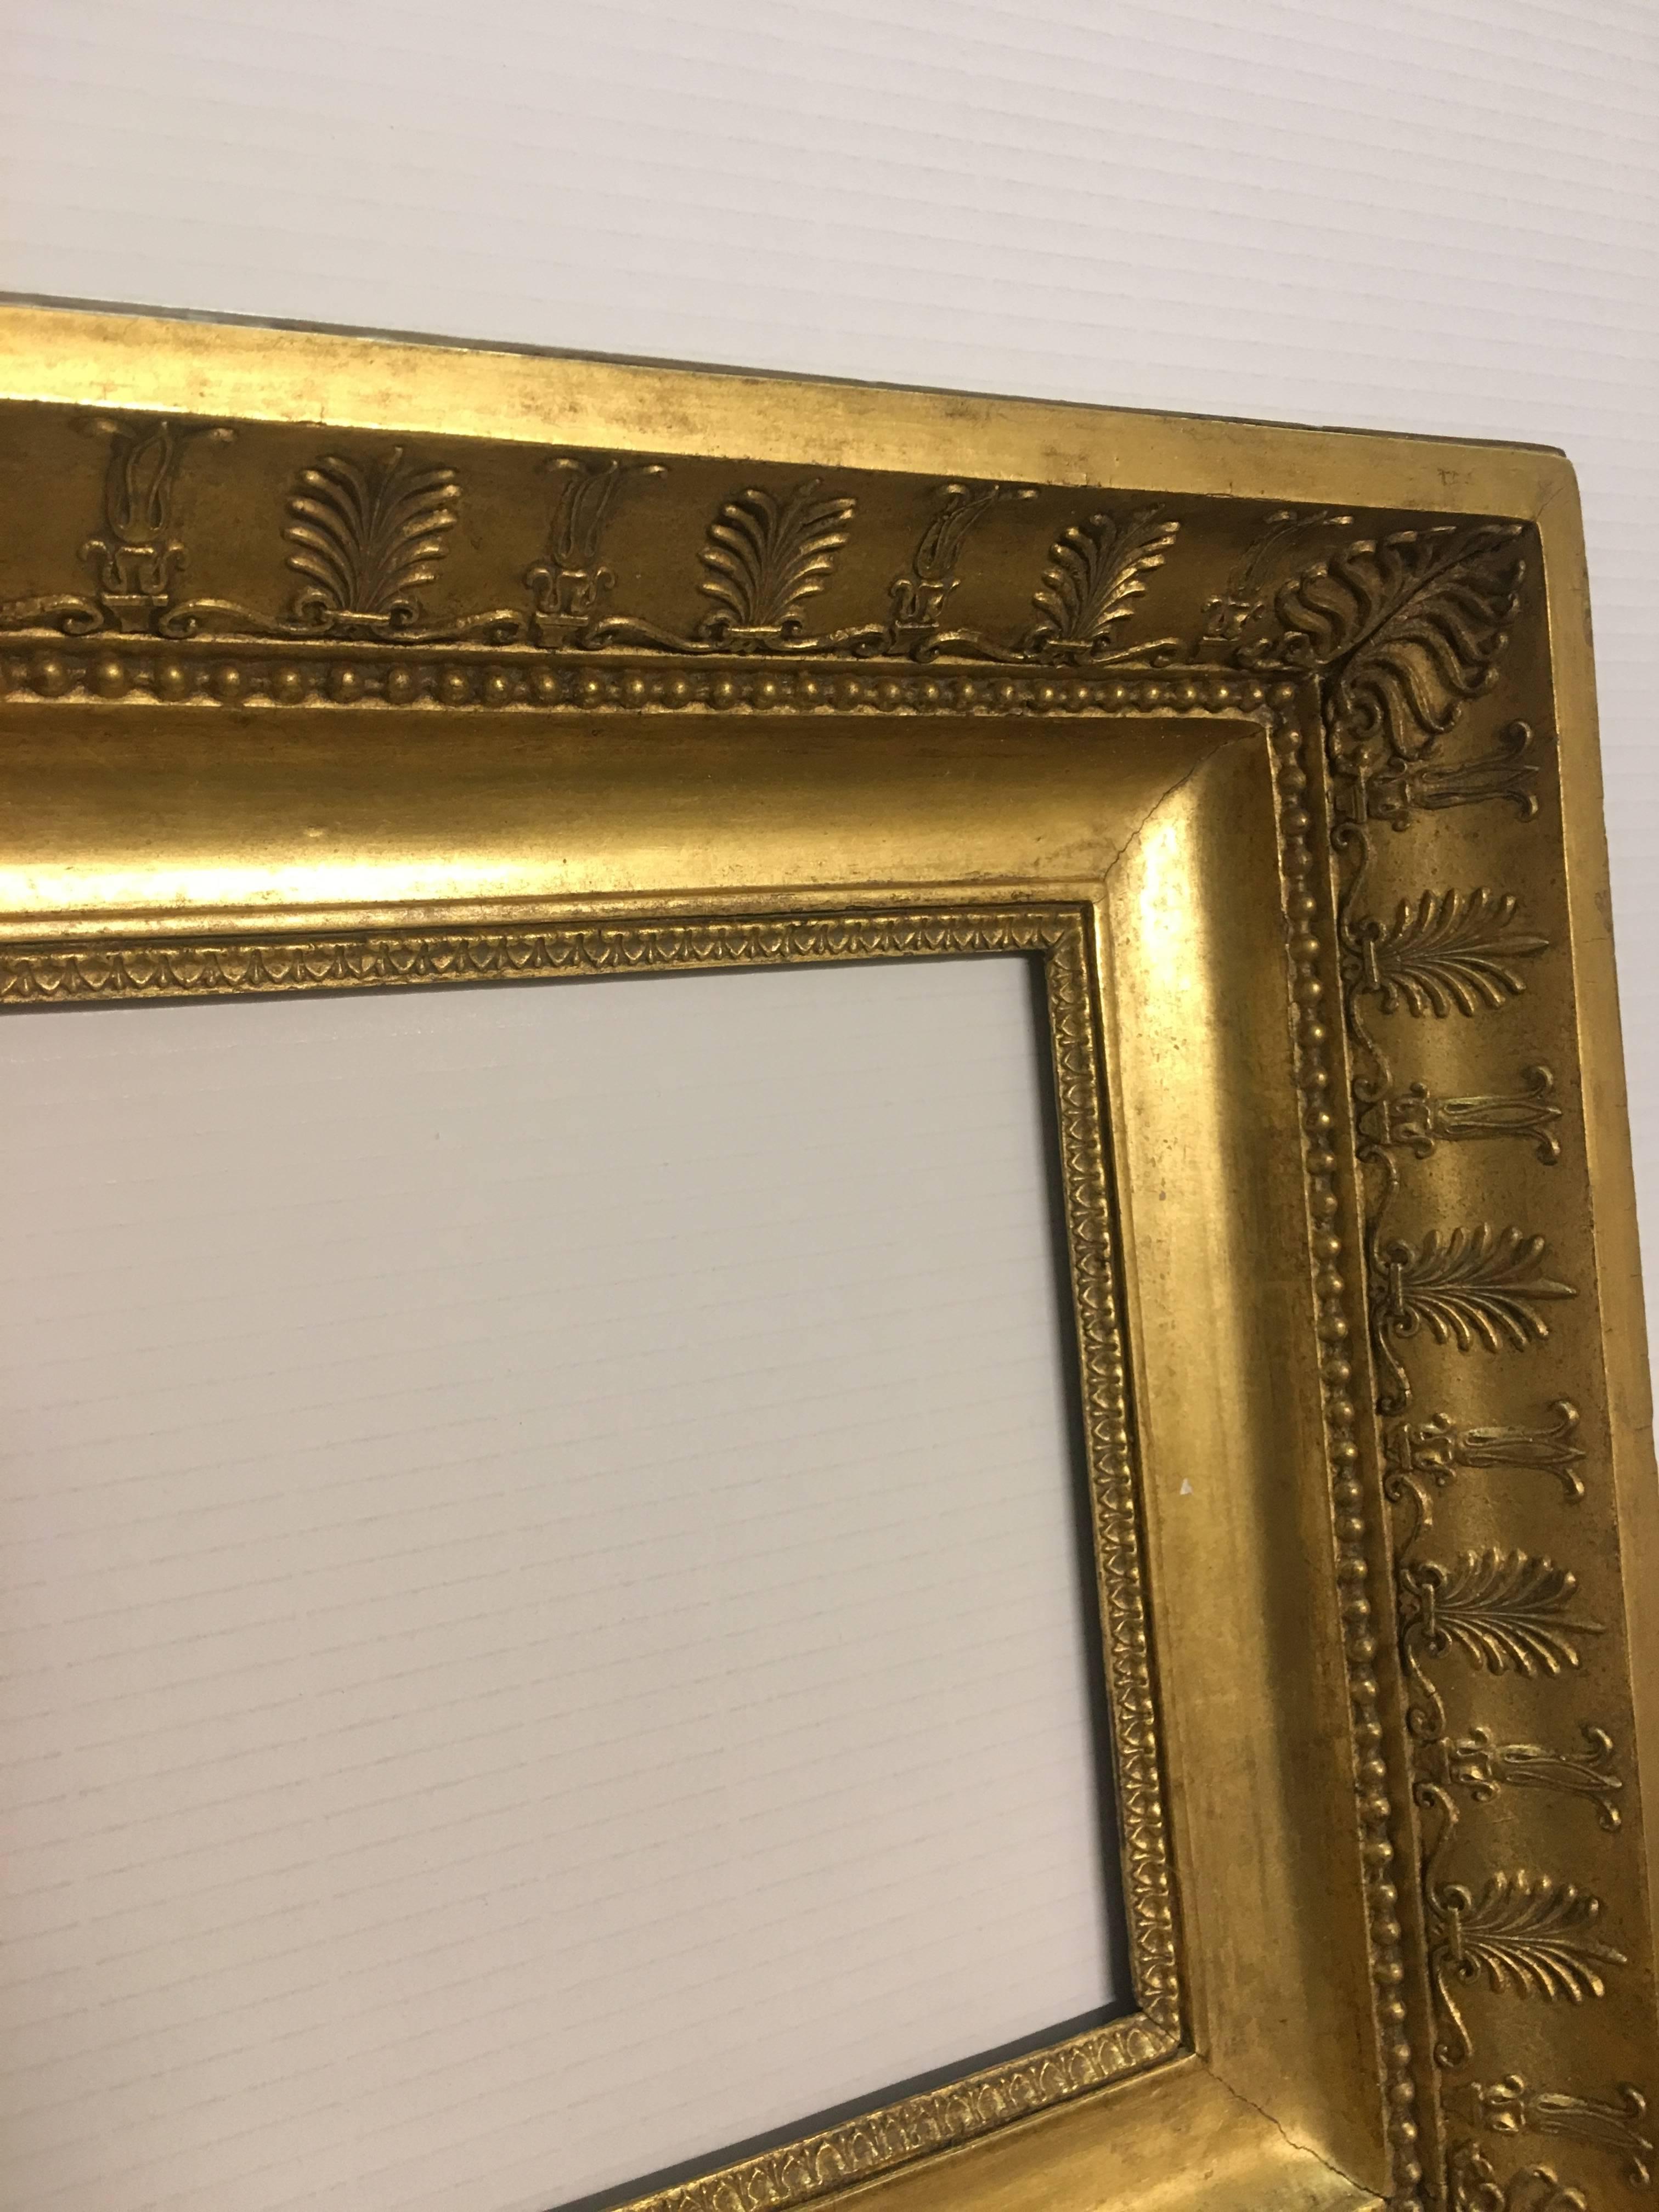 Late 19th Century Italian Neoclassical Wood Frame with Gold Leaf Cover For Sale 2